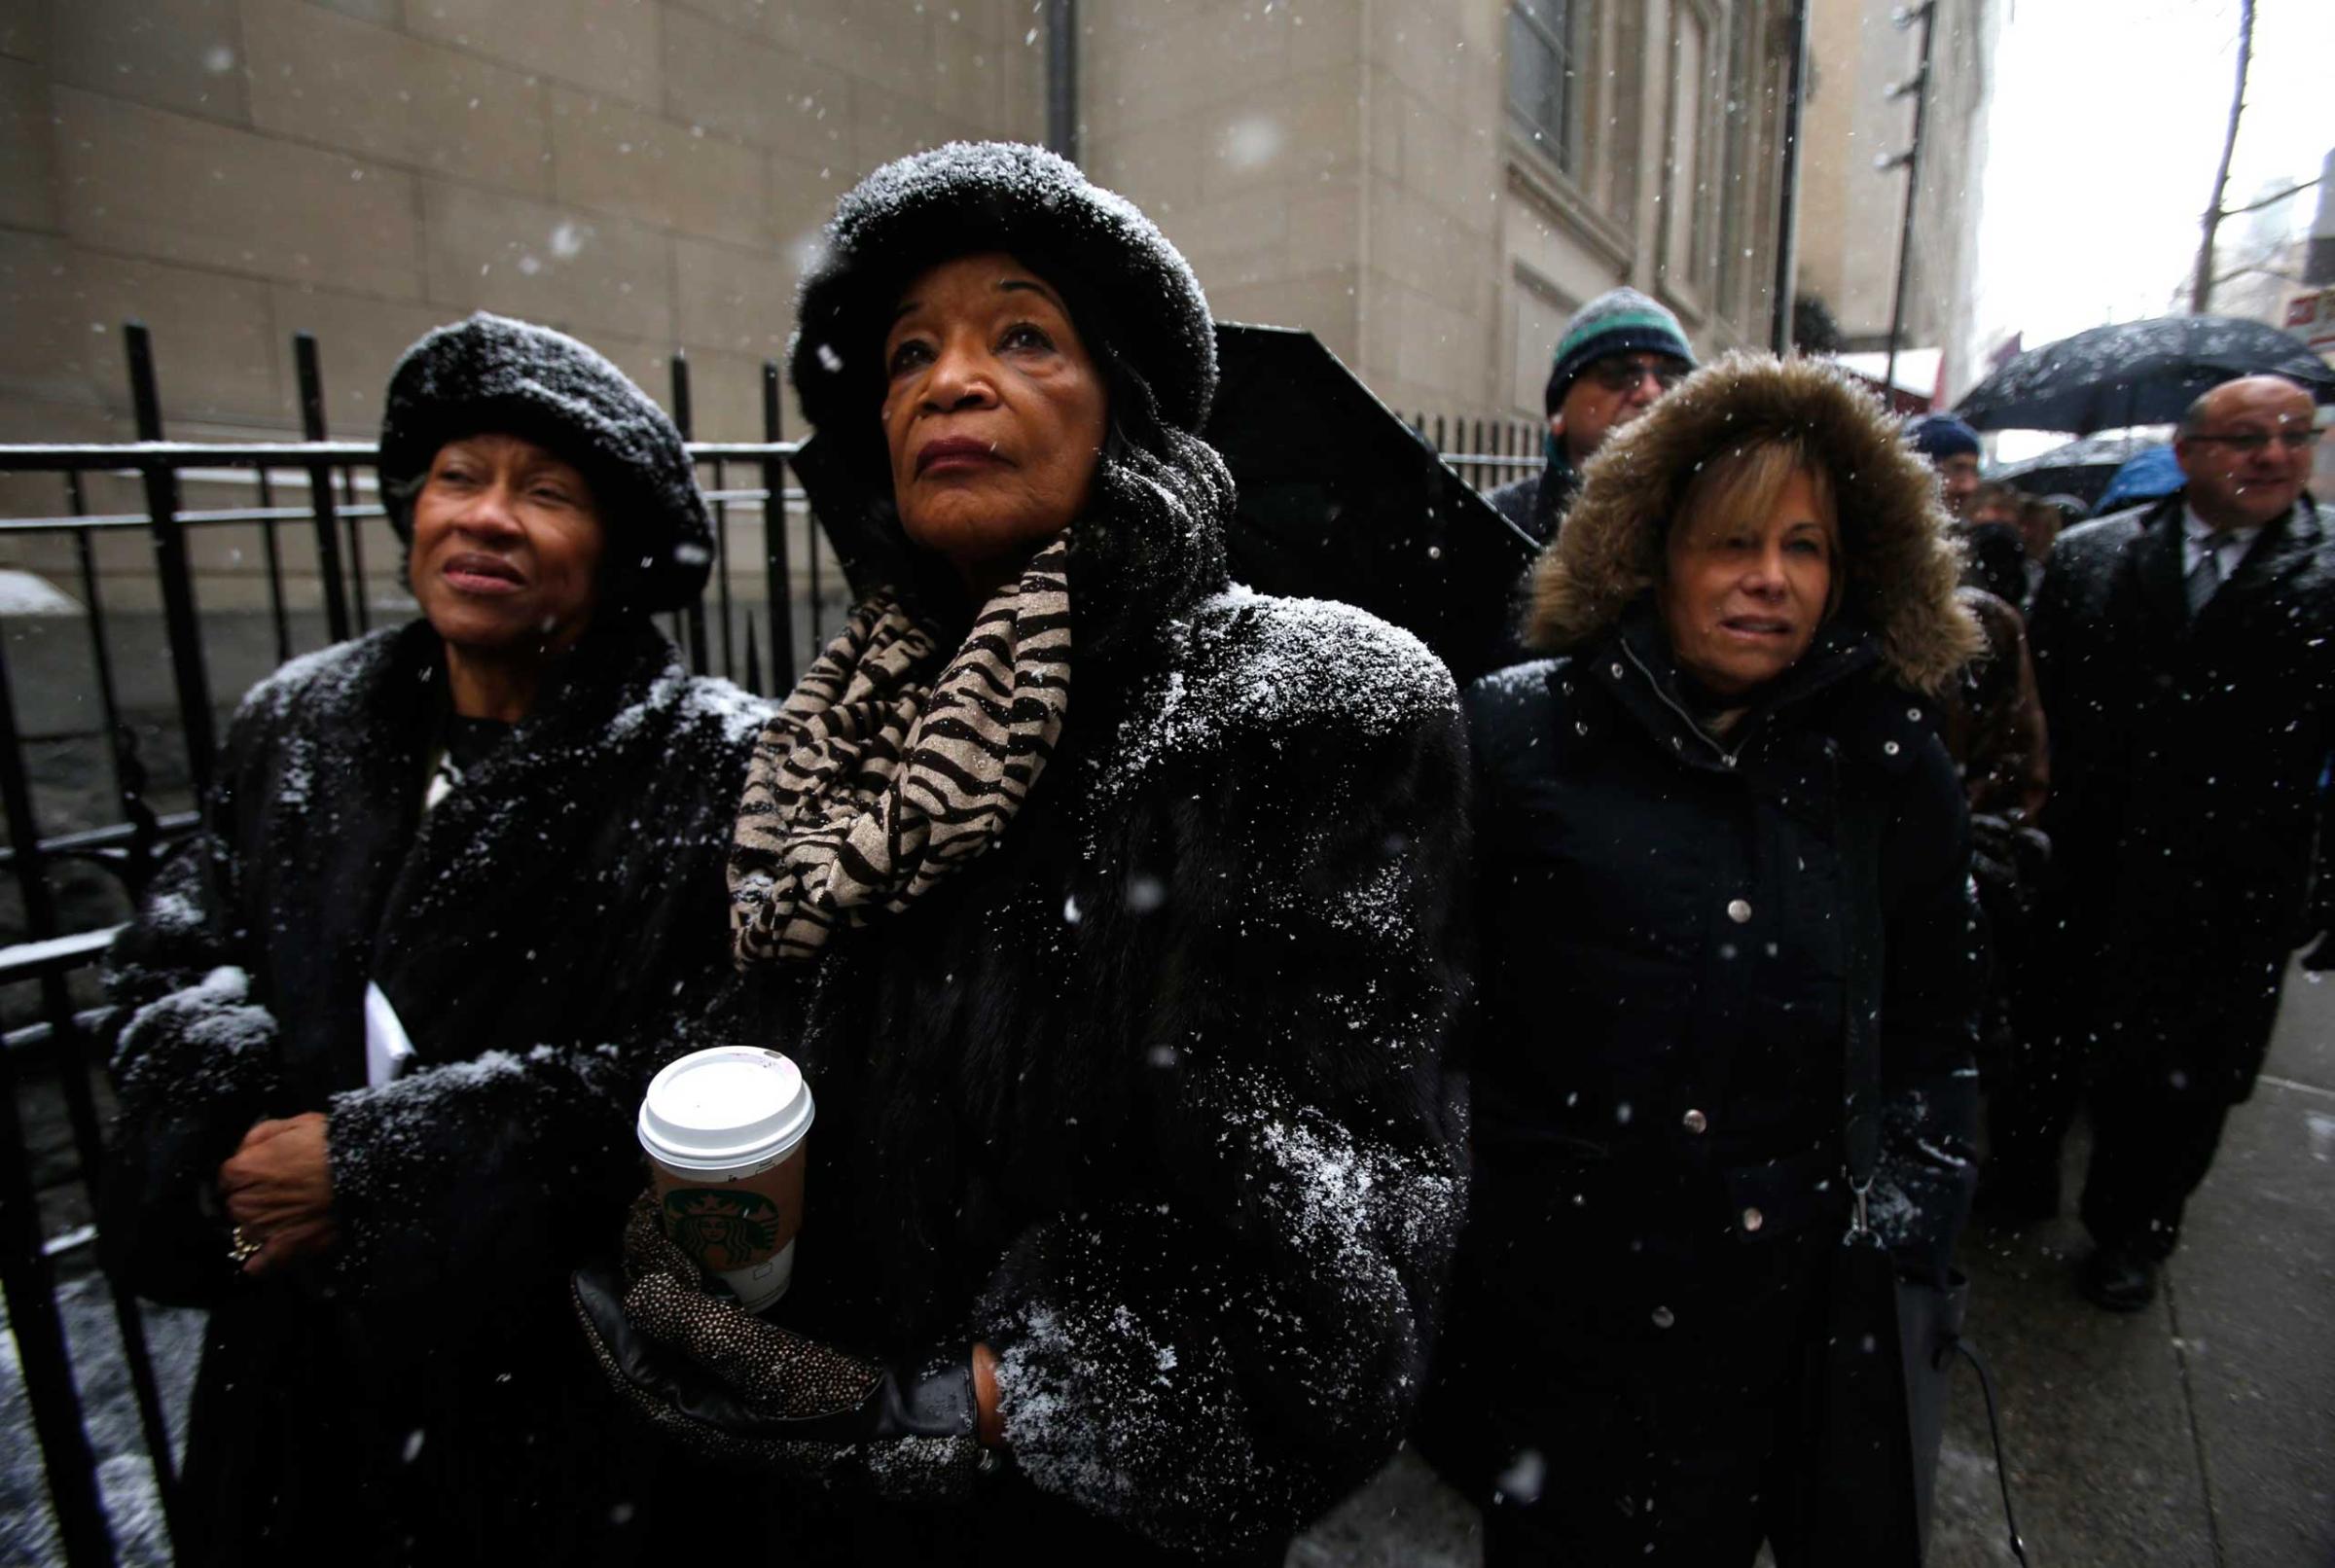 Mourners wait in line in the snow to enter St. Ignatius Loyola Church, before the funeral service for former New York Governor Cuomo in New York